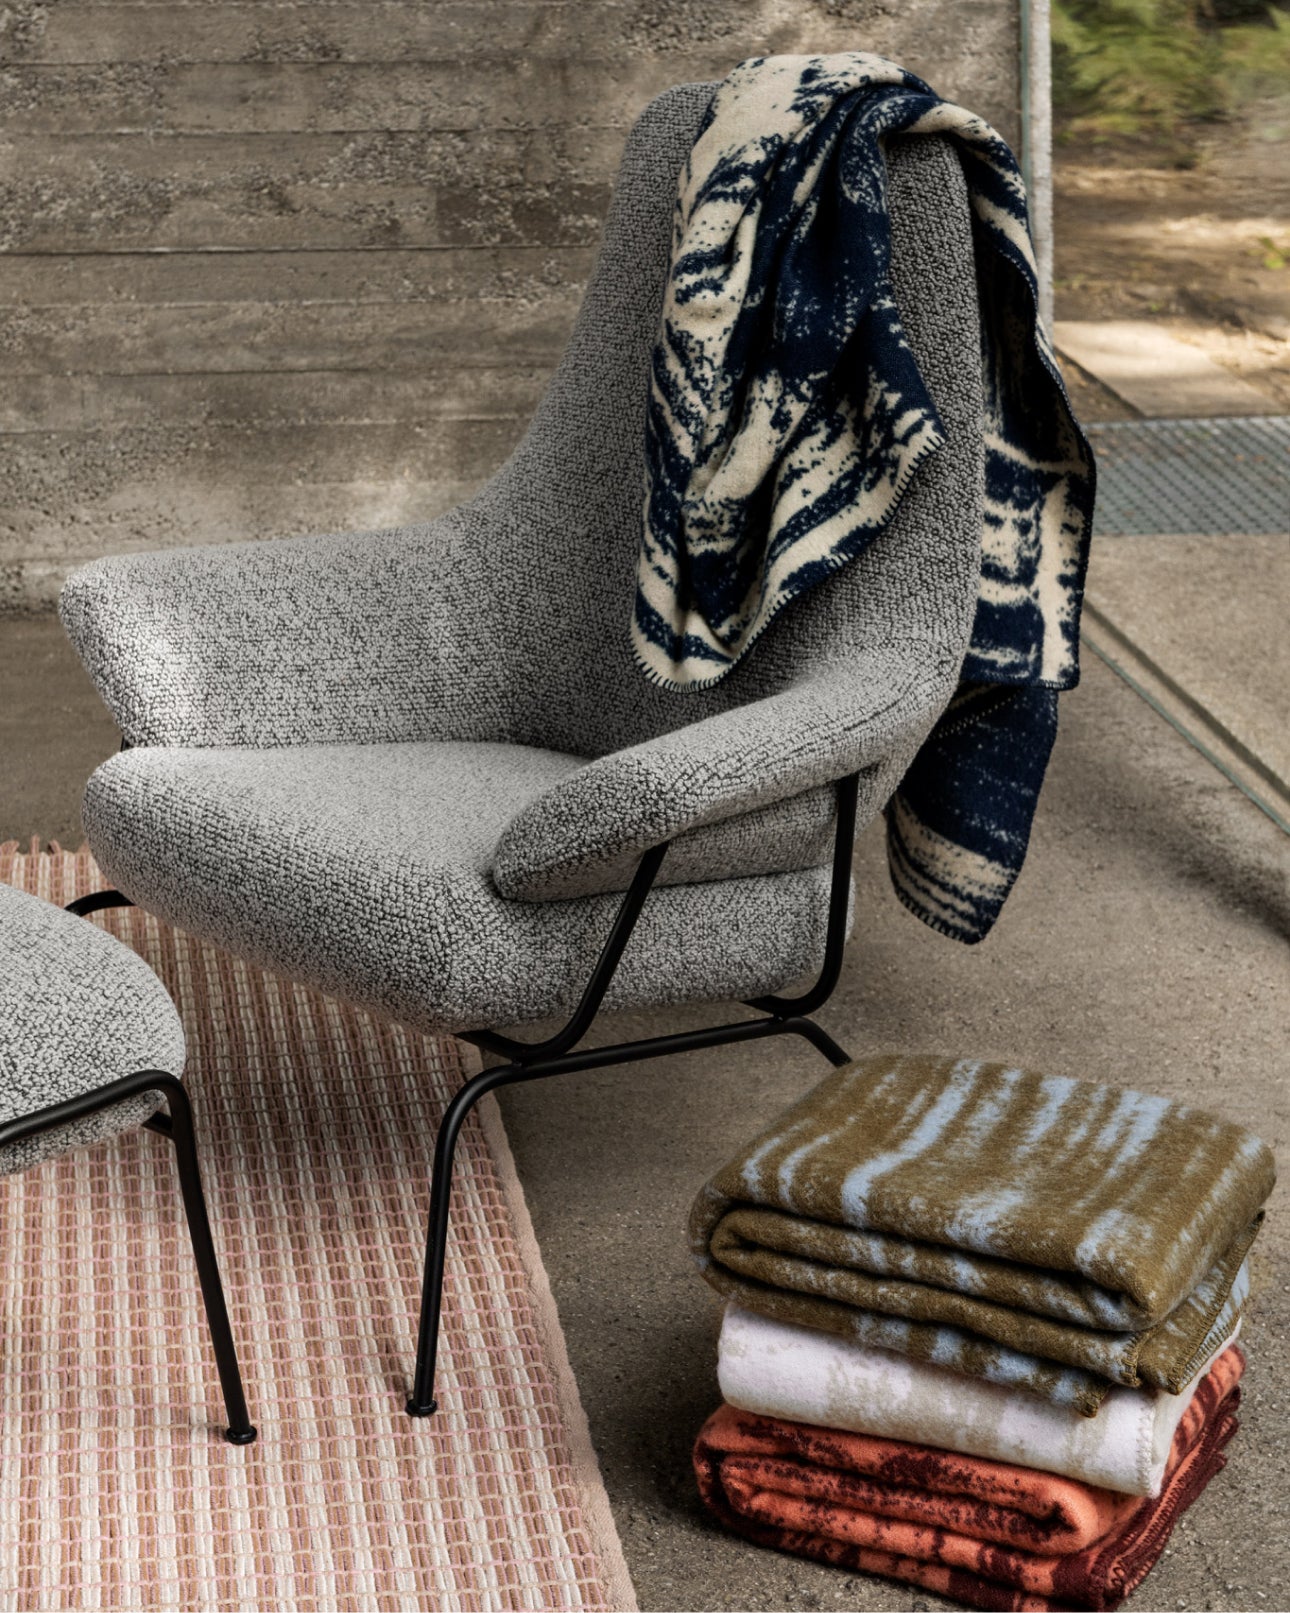 Hai Lounge Chair + Ottoman in Pebble with 4 Glitch Throws in the shades Coral / Rust Red, Sand / Off-White, Powder Blue / Olive Green and Pale Lemon / Navy Blue with a Rope Rug in Rose Quartz.